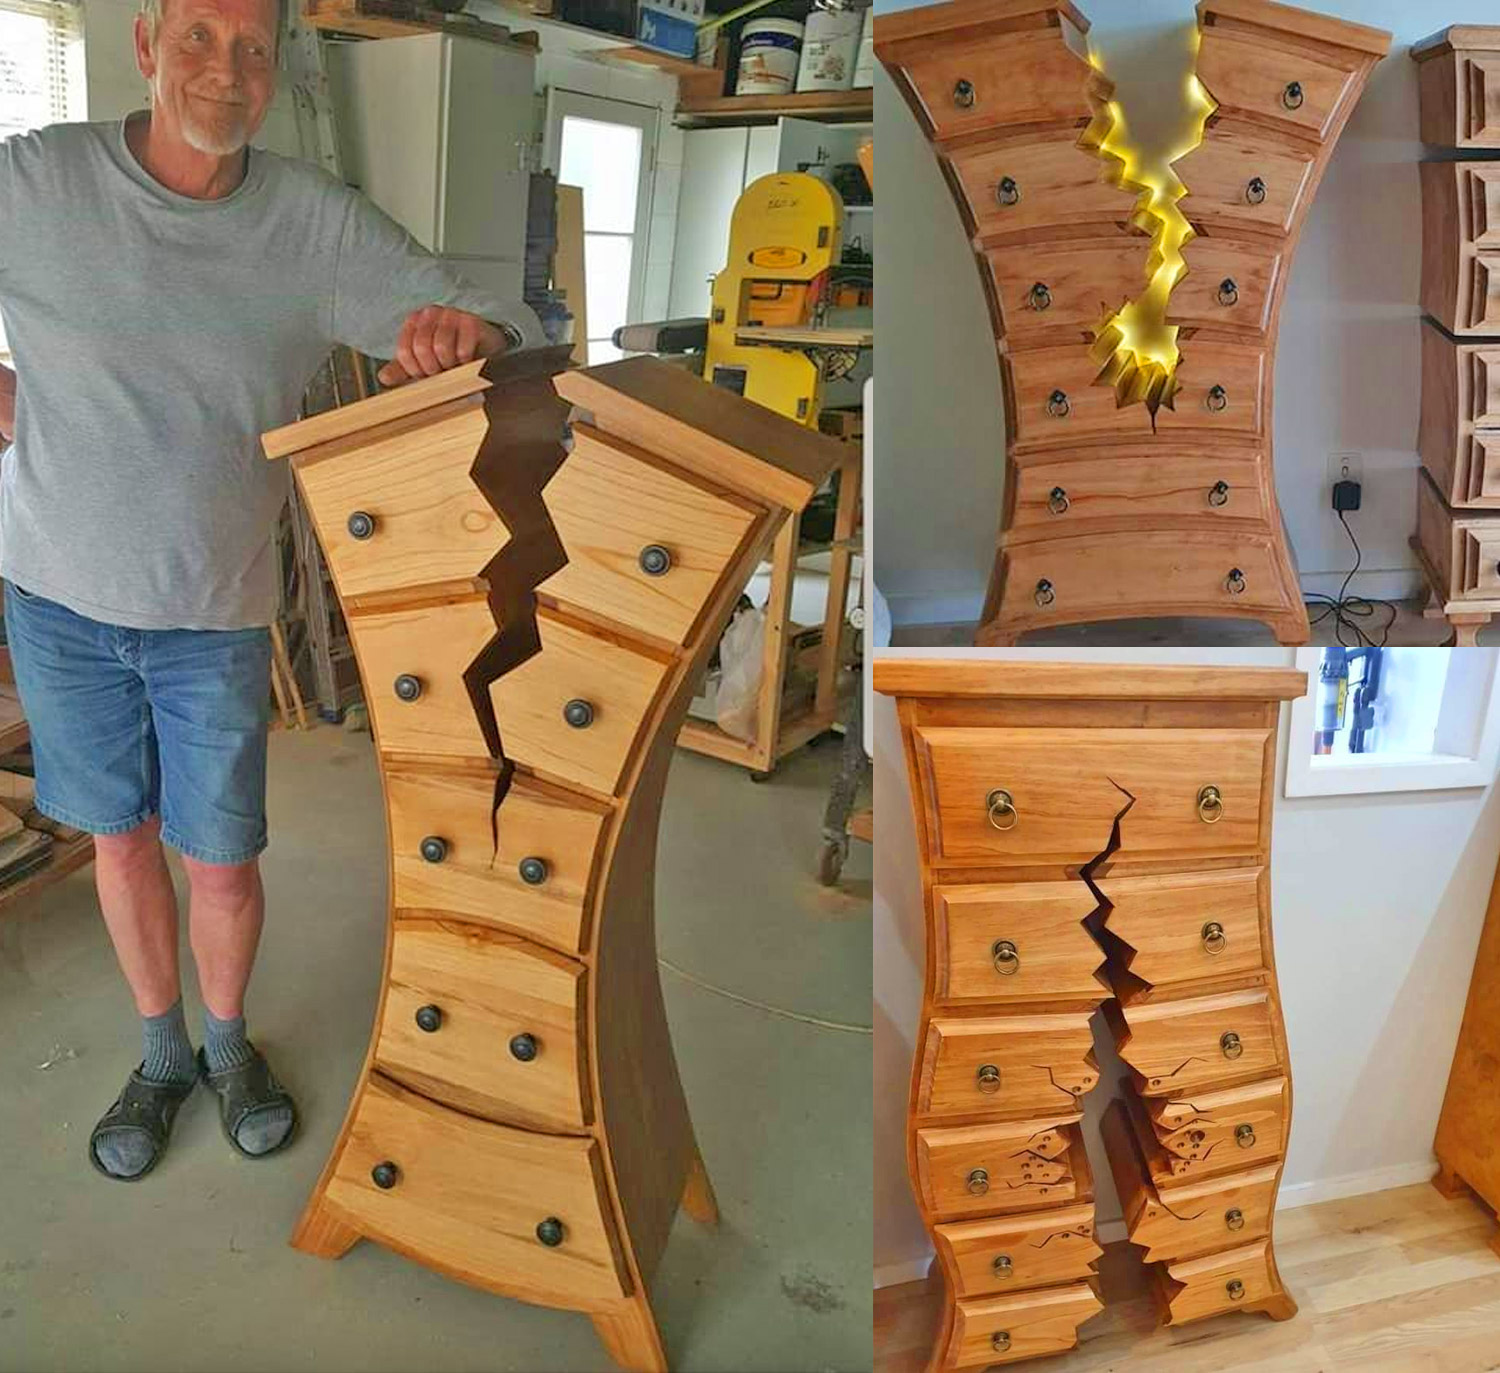 These Incredible Warped And Cracked Design Dressers Seem Like They